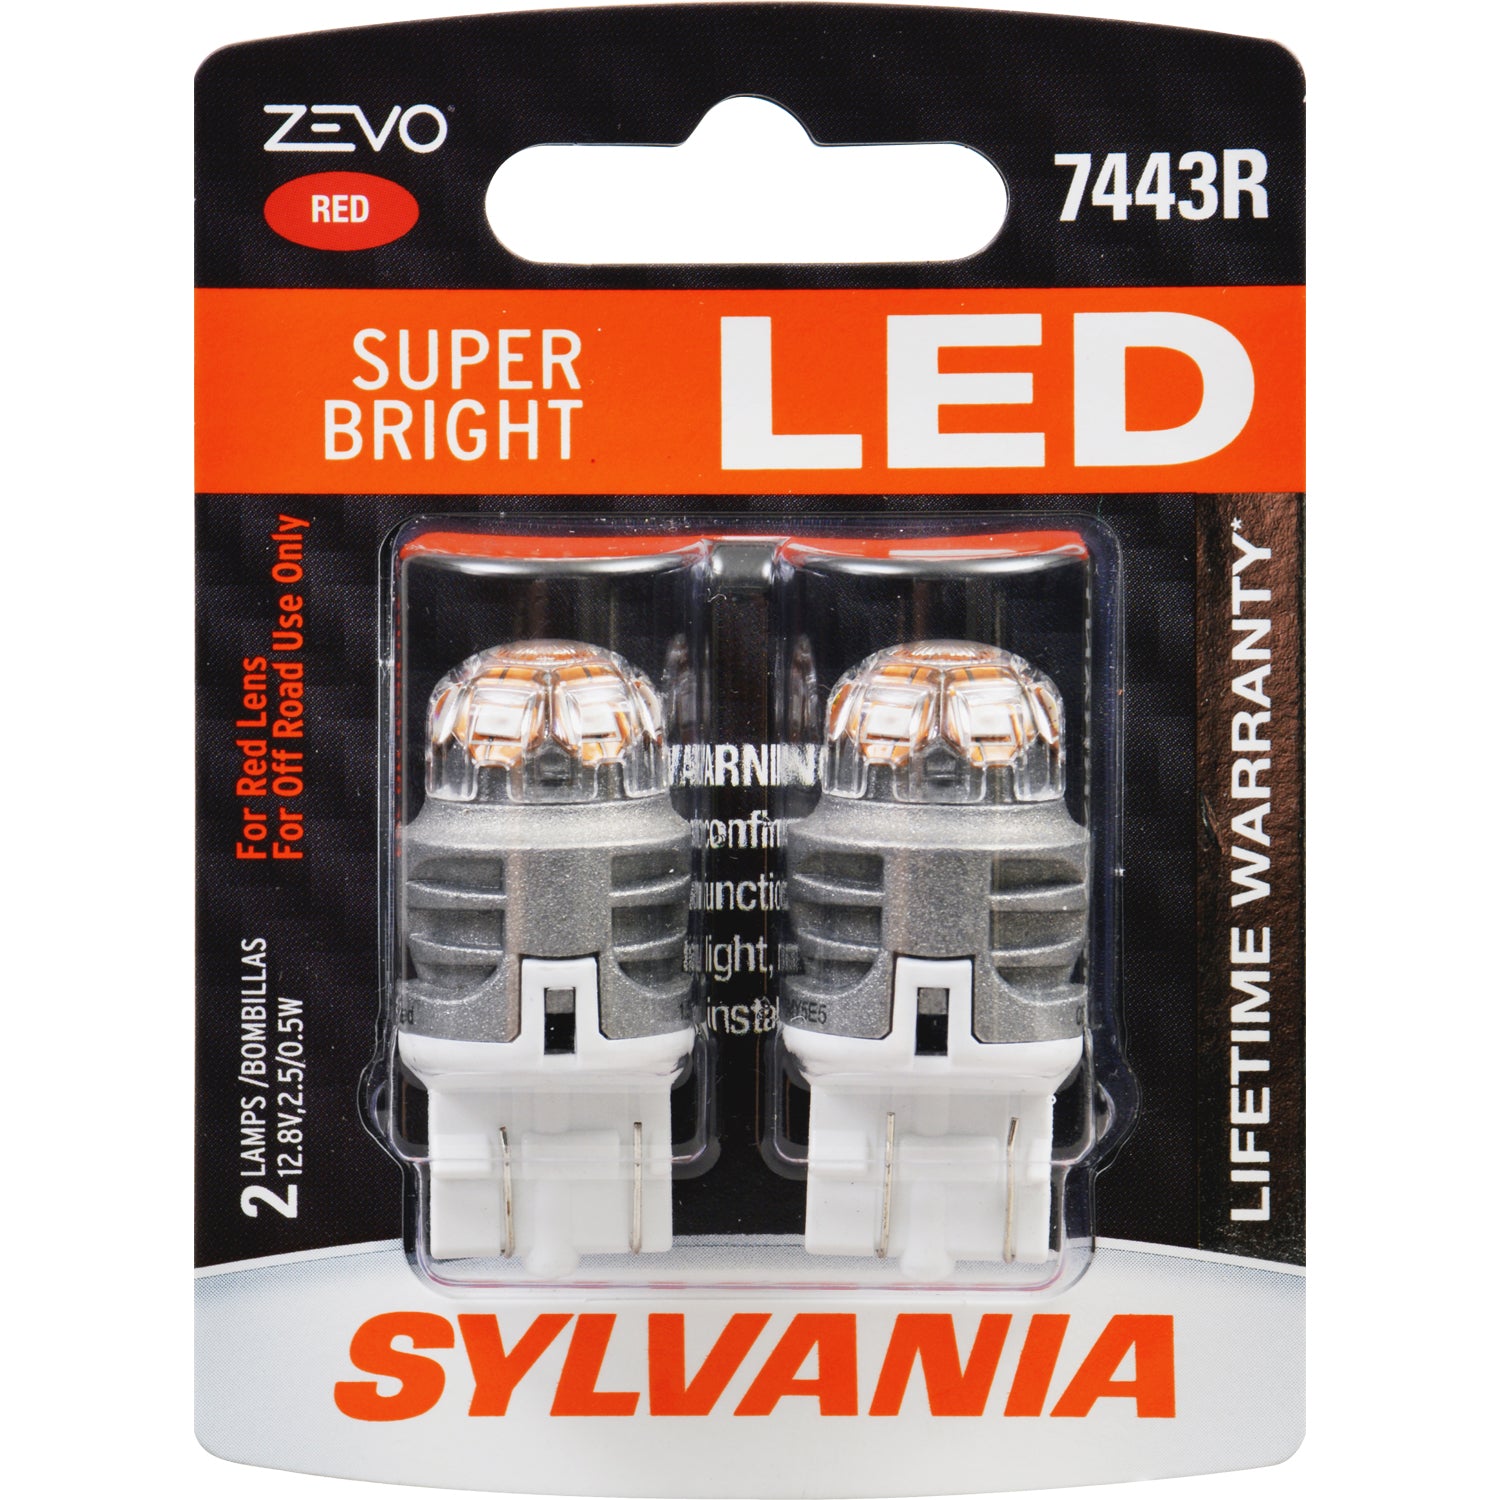 automotive led replacement bulbs - 100 results